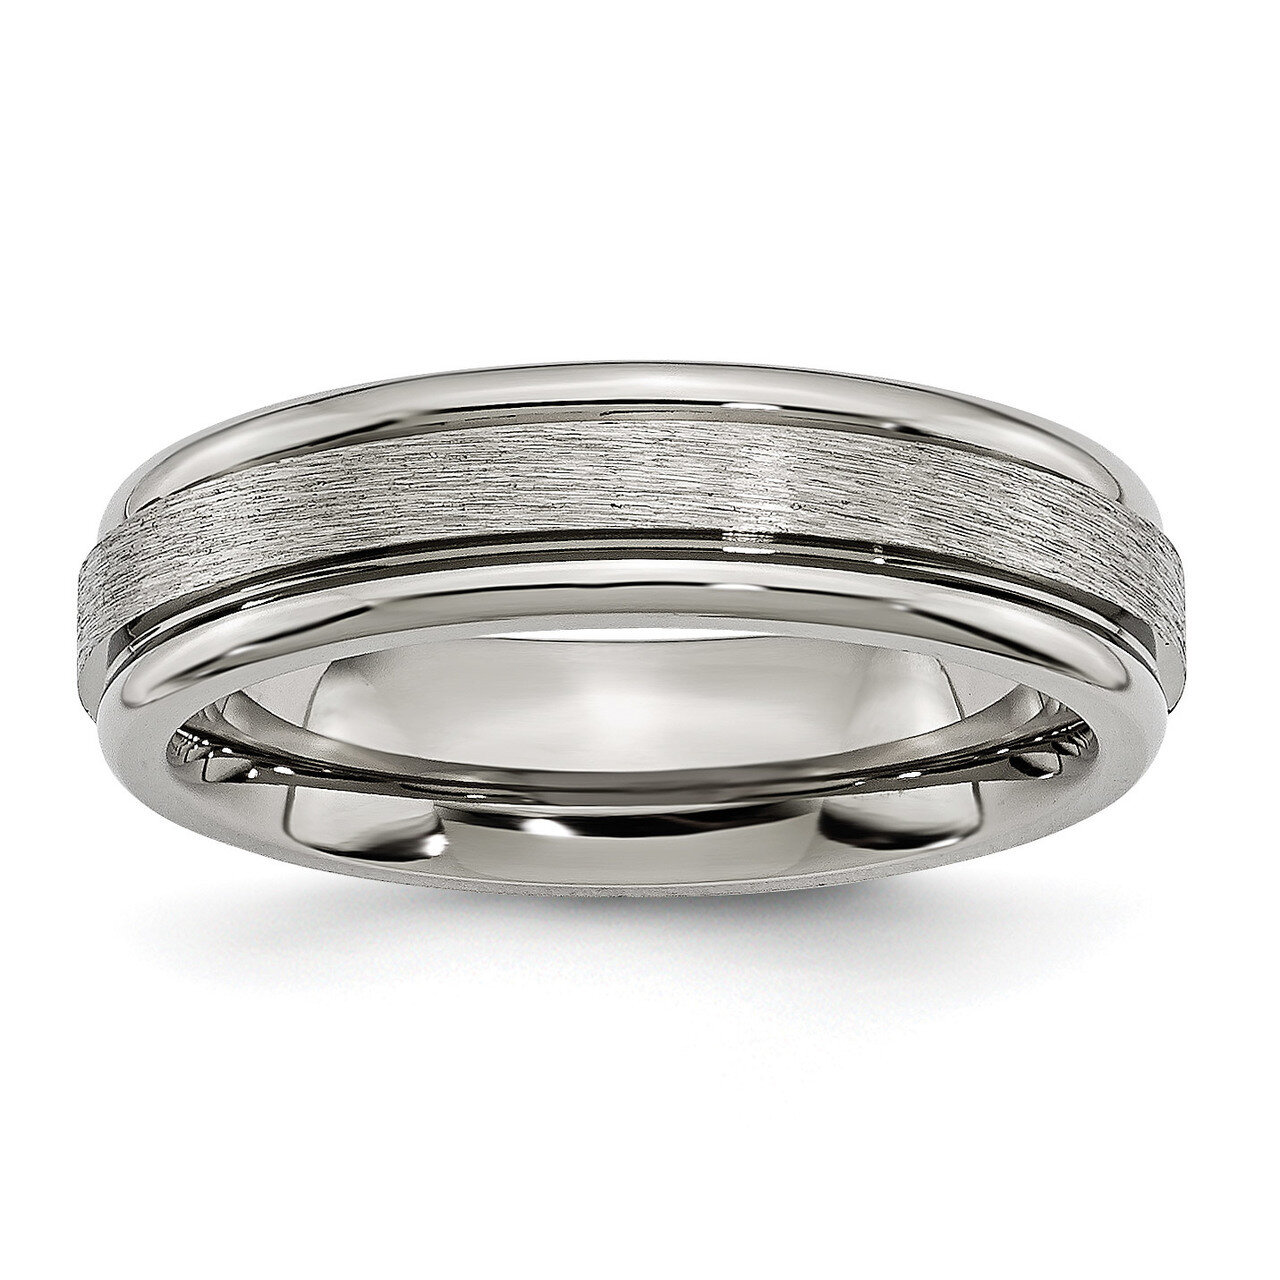 Edge 6mm Satin and Polished Band Titanium Grooved TB14_CH Engravable